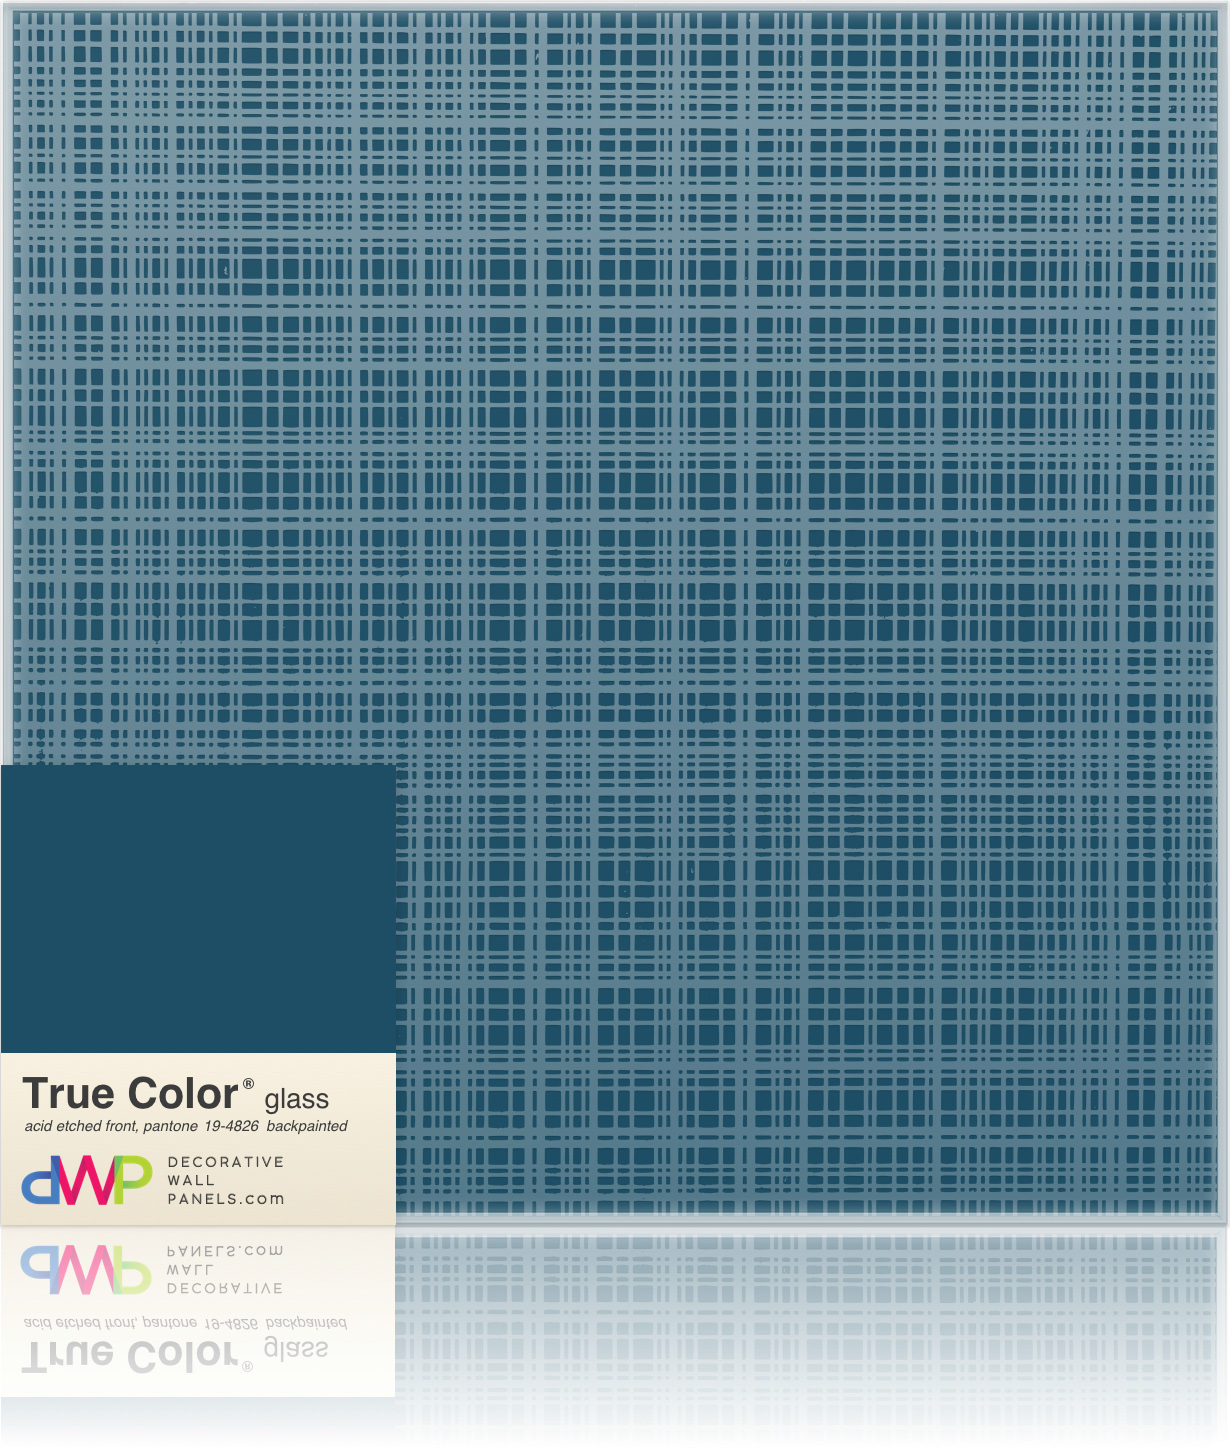 Plaid-Backpainted - Decorative wall Panels